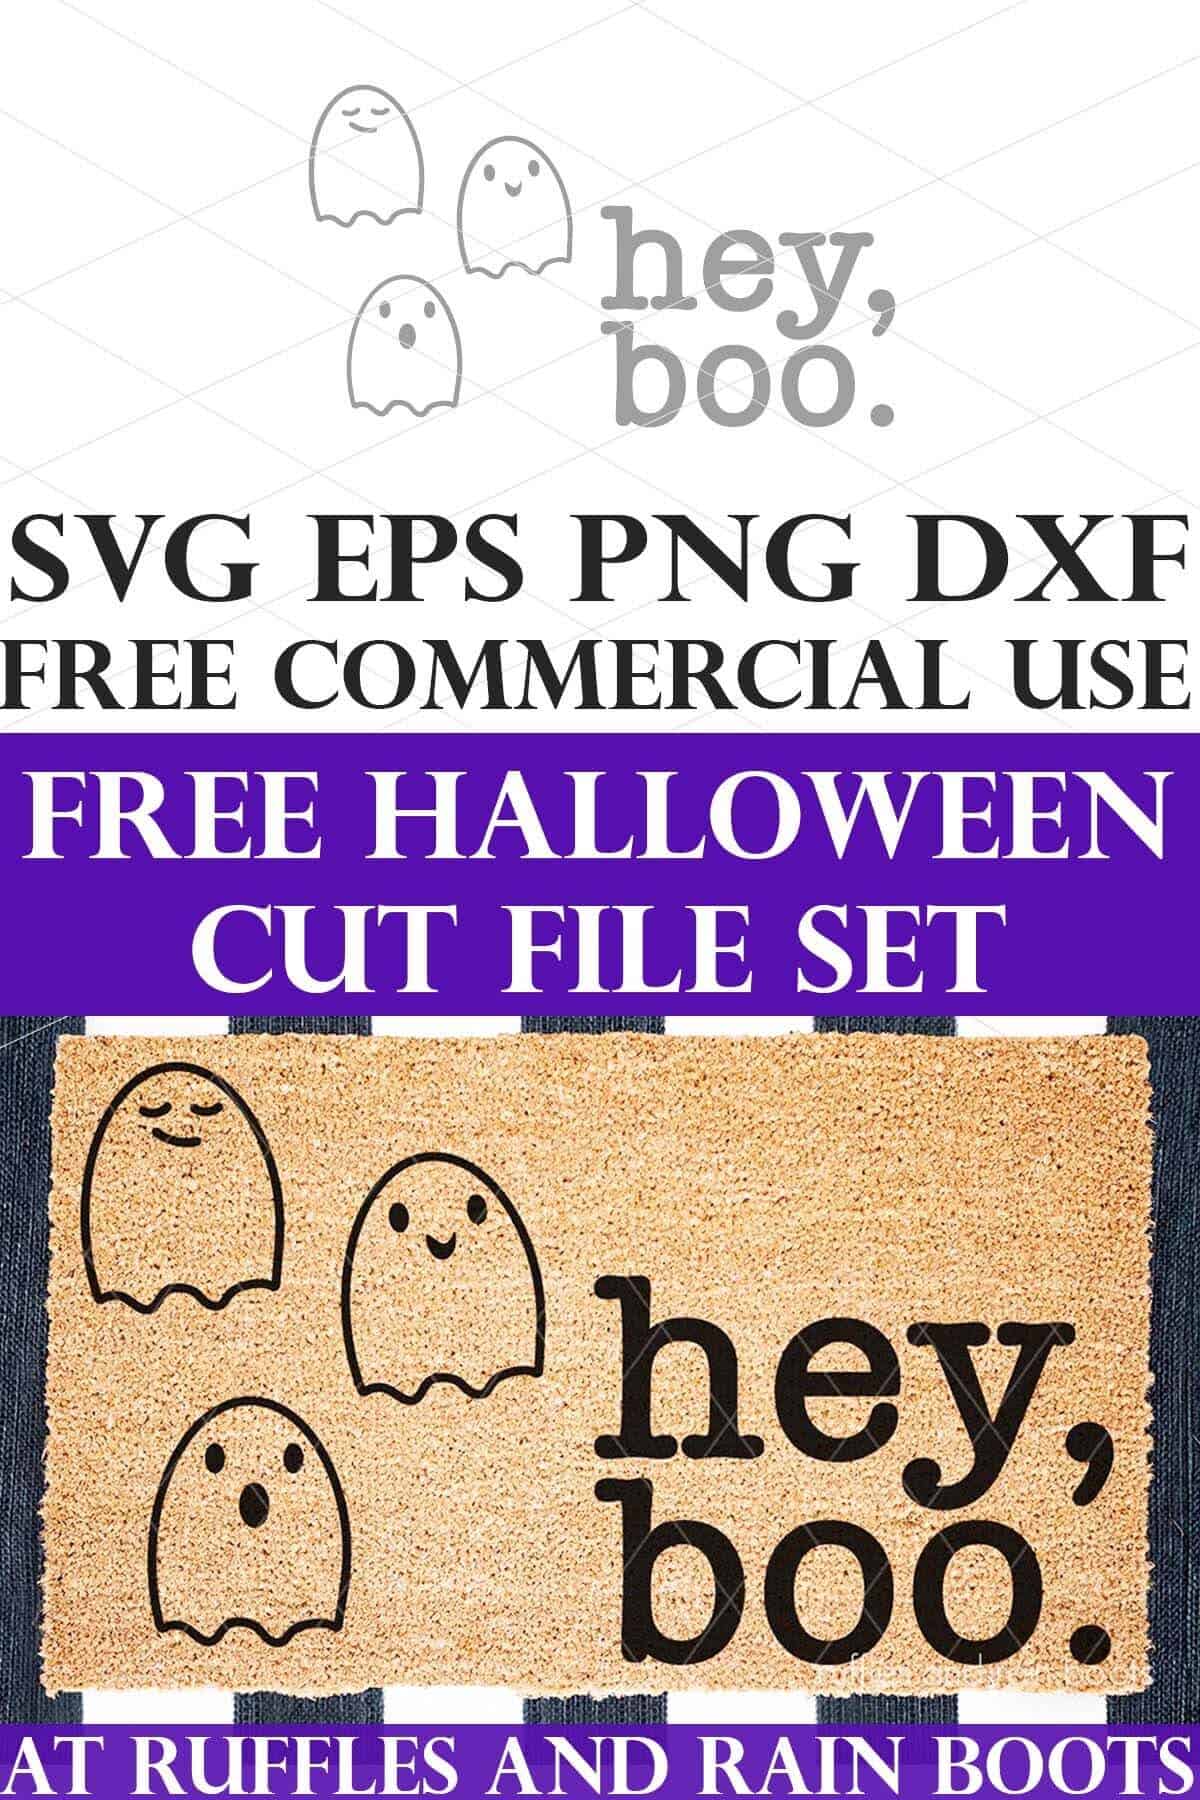 Hey Boo doormat with ghost SVG with text which reads free Halloween cut file set commercial use.